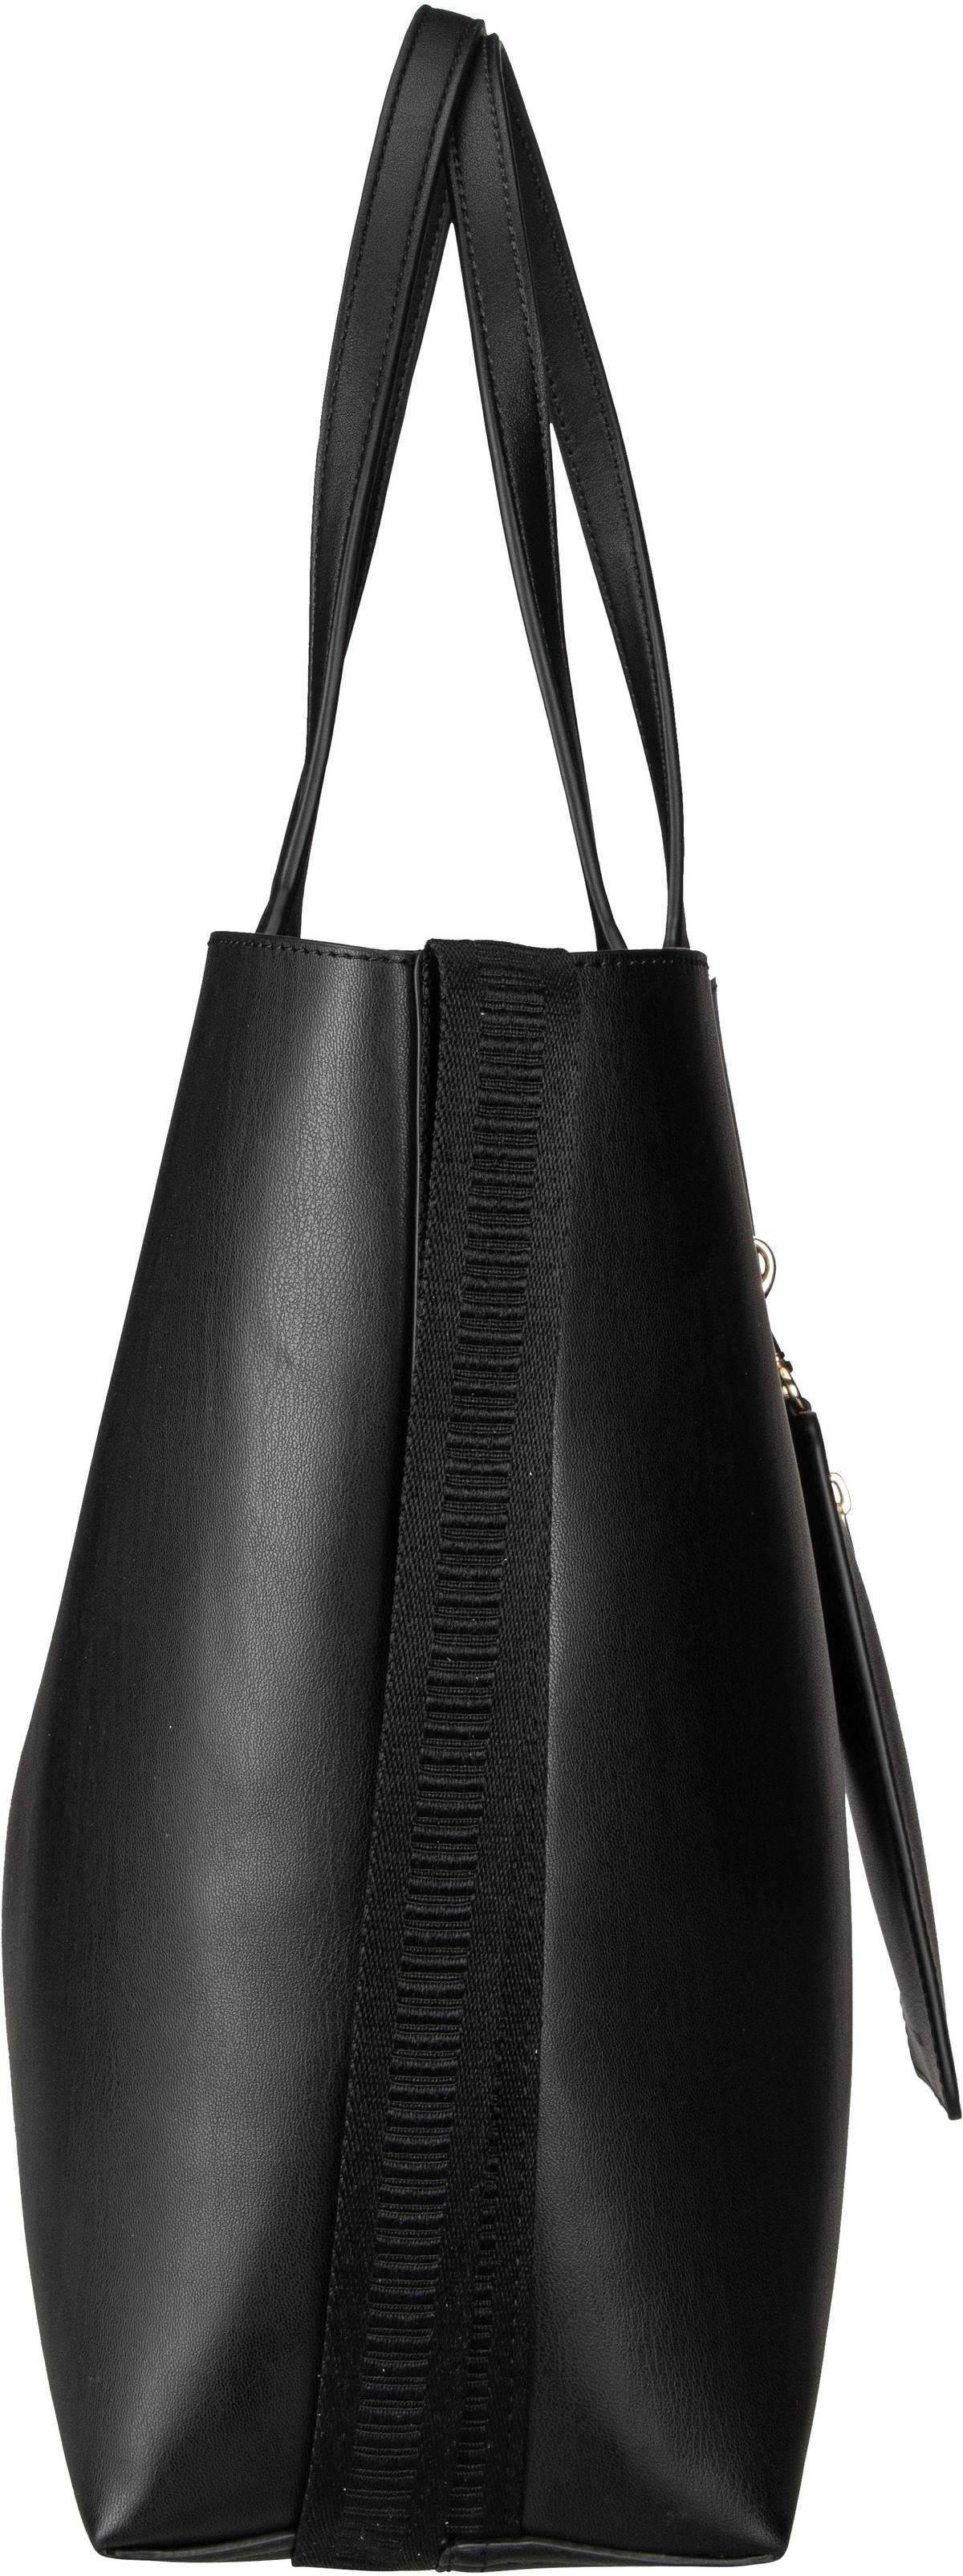 Tommy Hilfiger Iconic Tommy Tote PF23 - Black